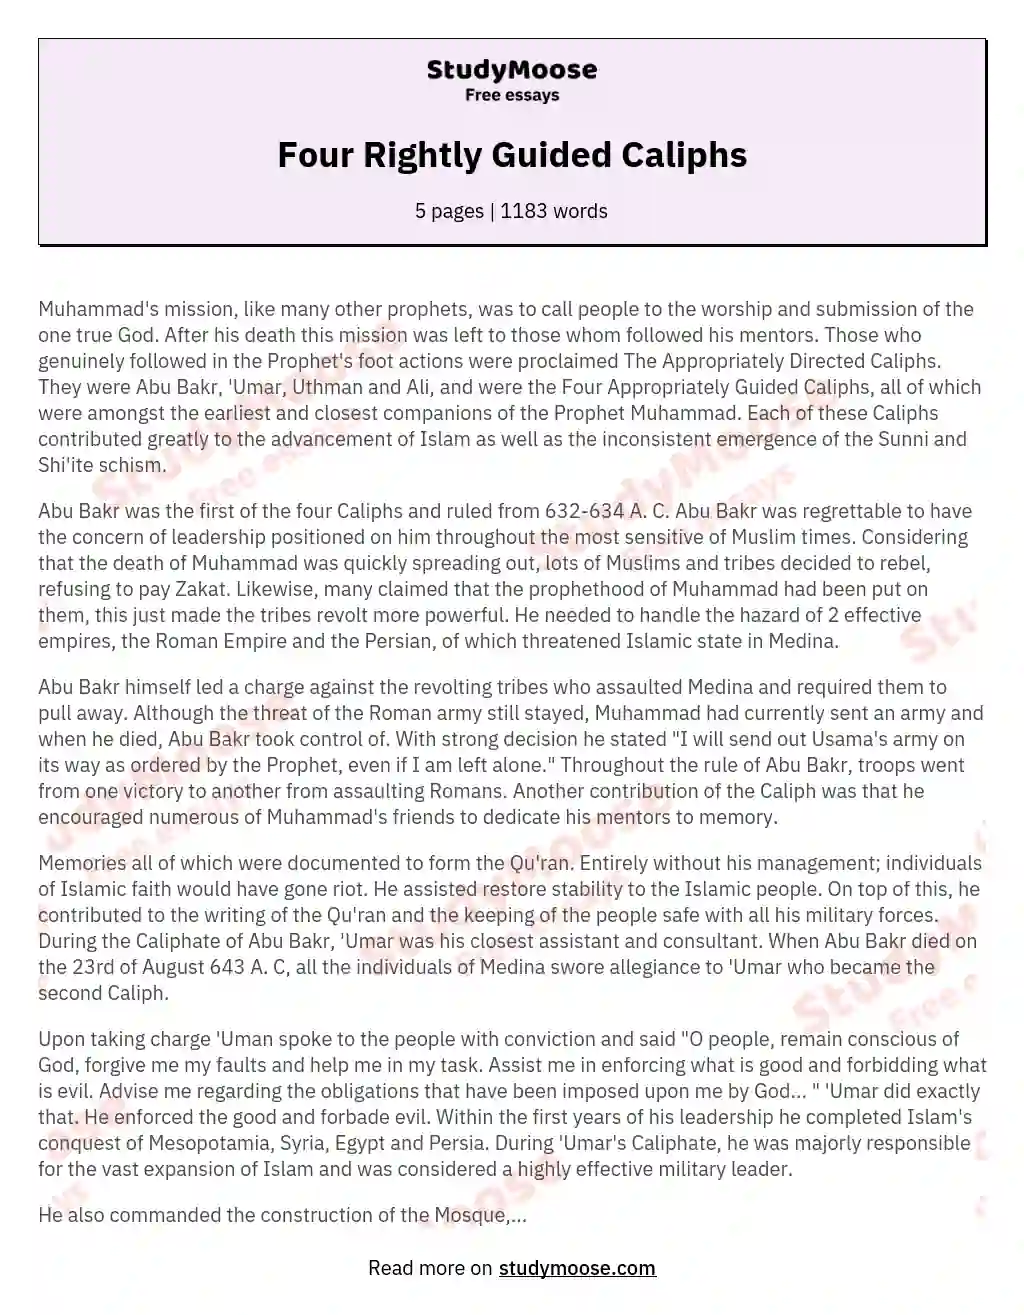 Four Rightly Guided Caliphs essay